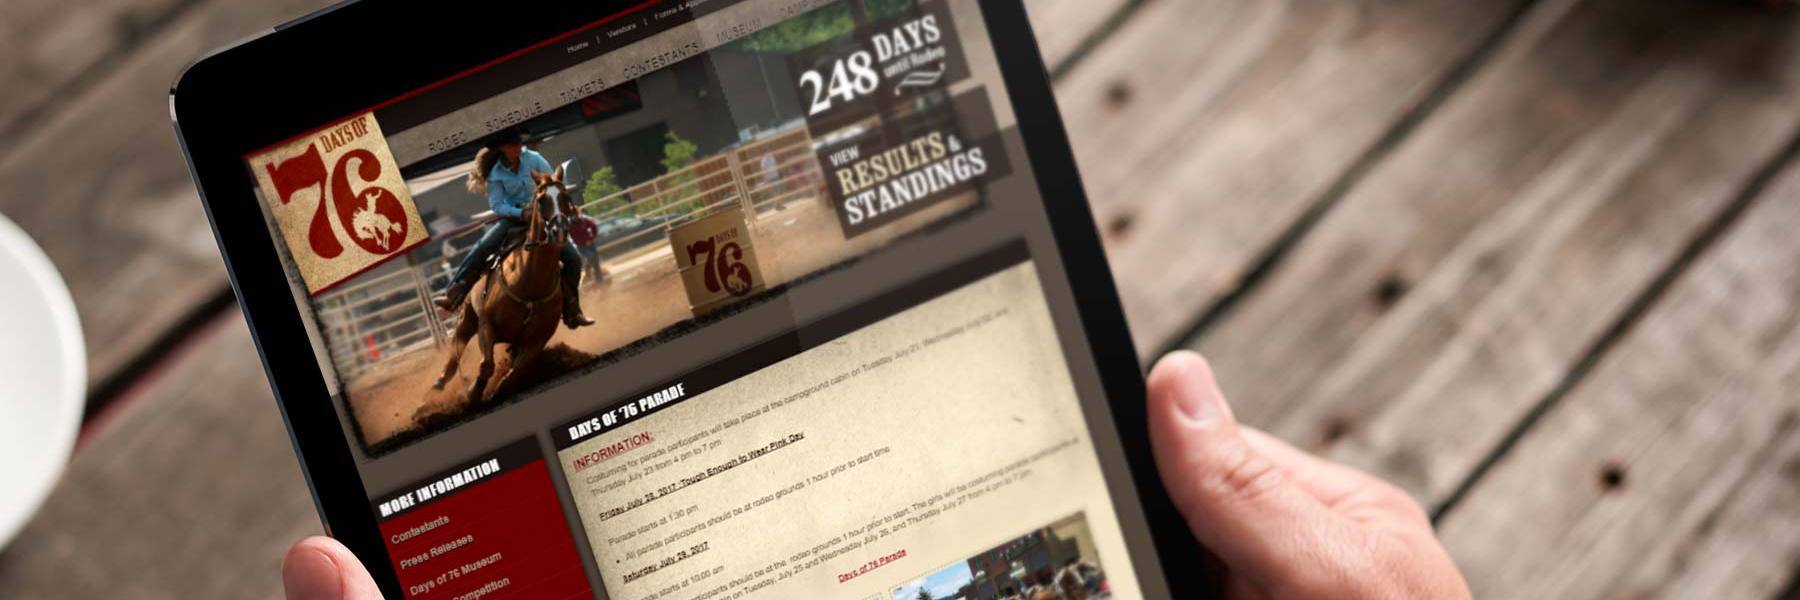 Days of 76 Rodeo website on tablet